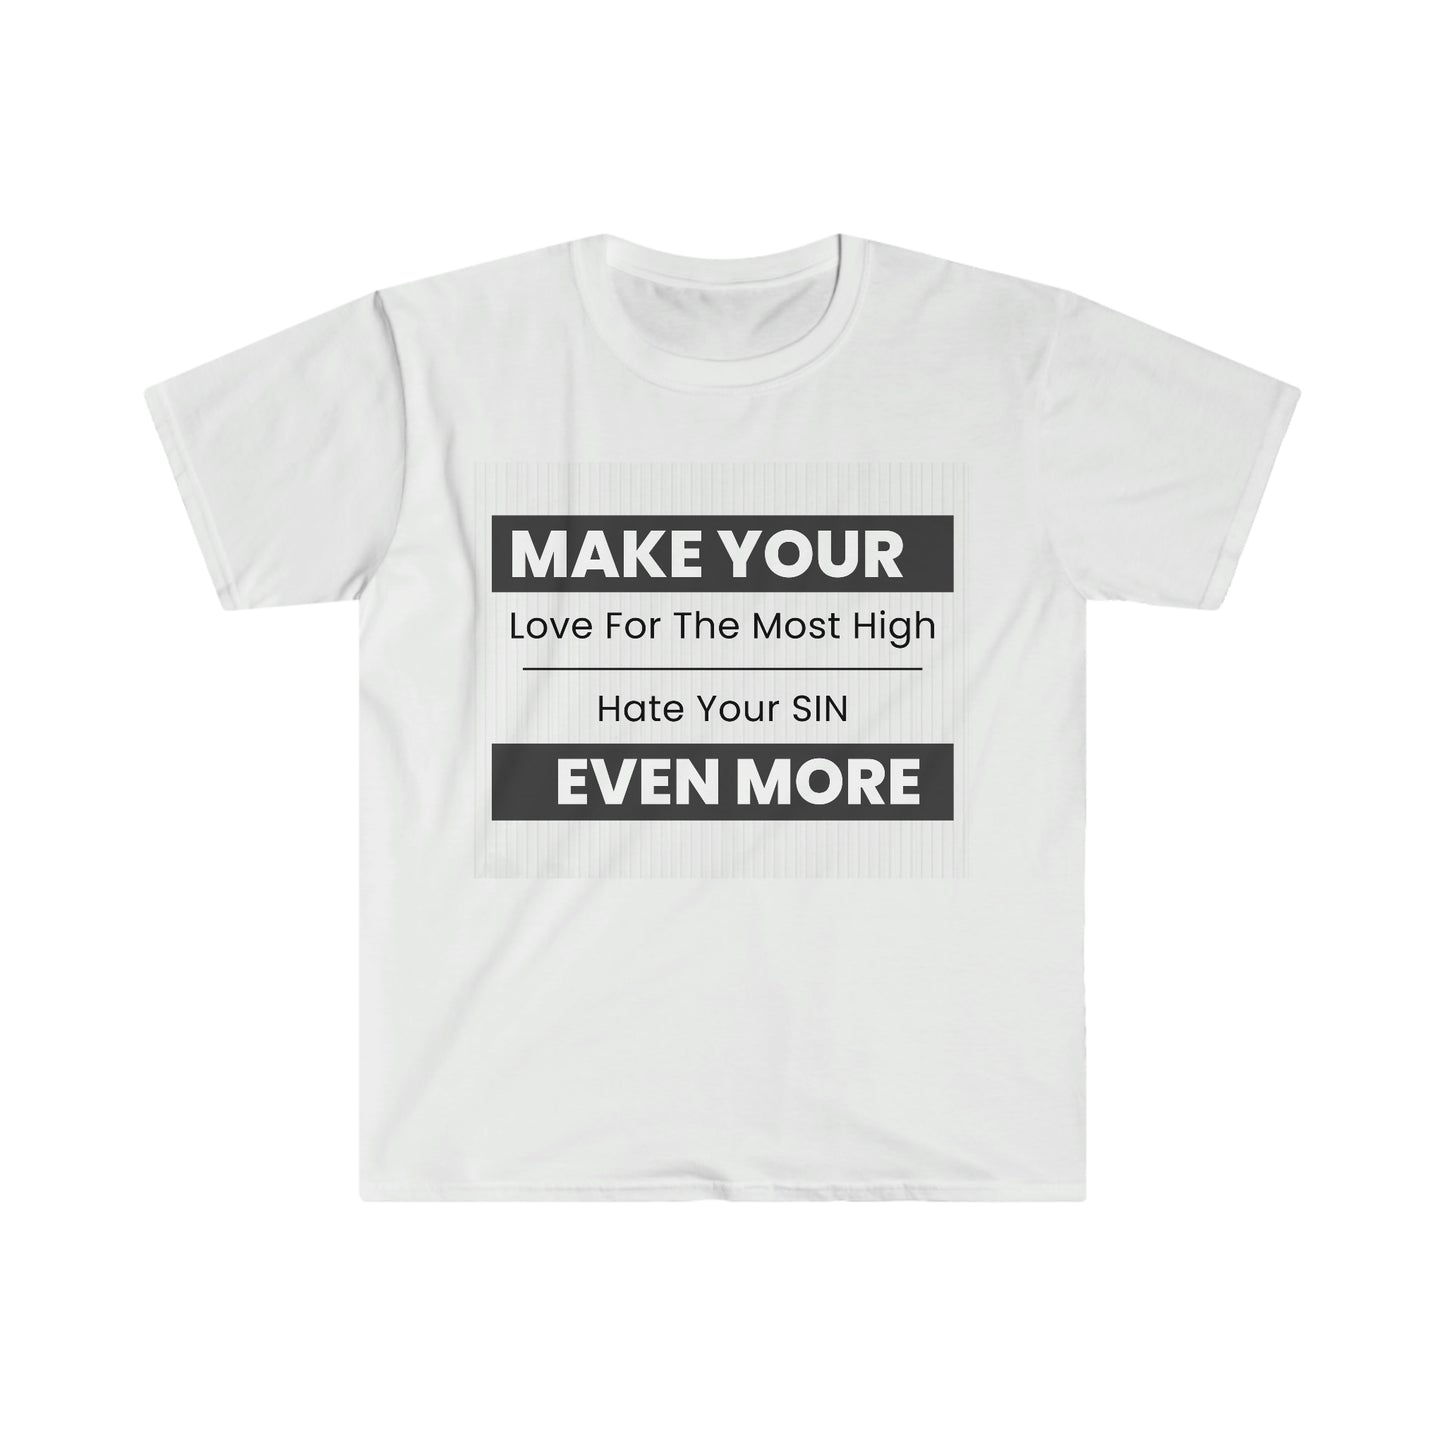 The Hate Your Sin Tee